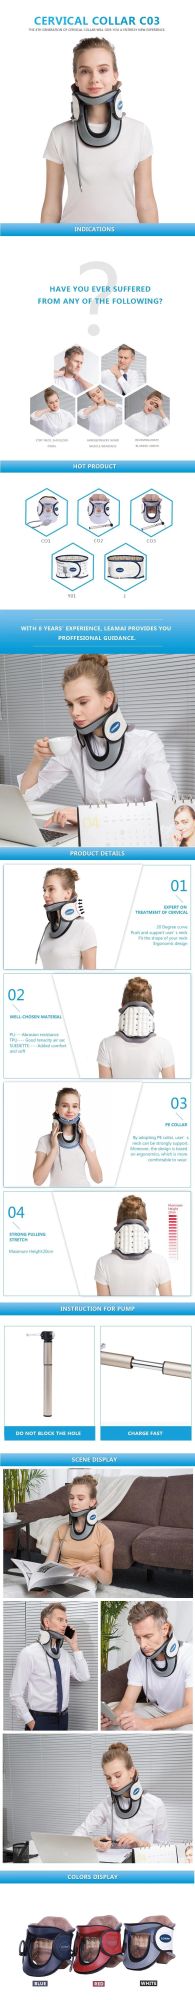 Neck Hero Cervical Traction Device Cervical Collar